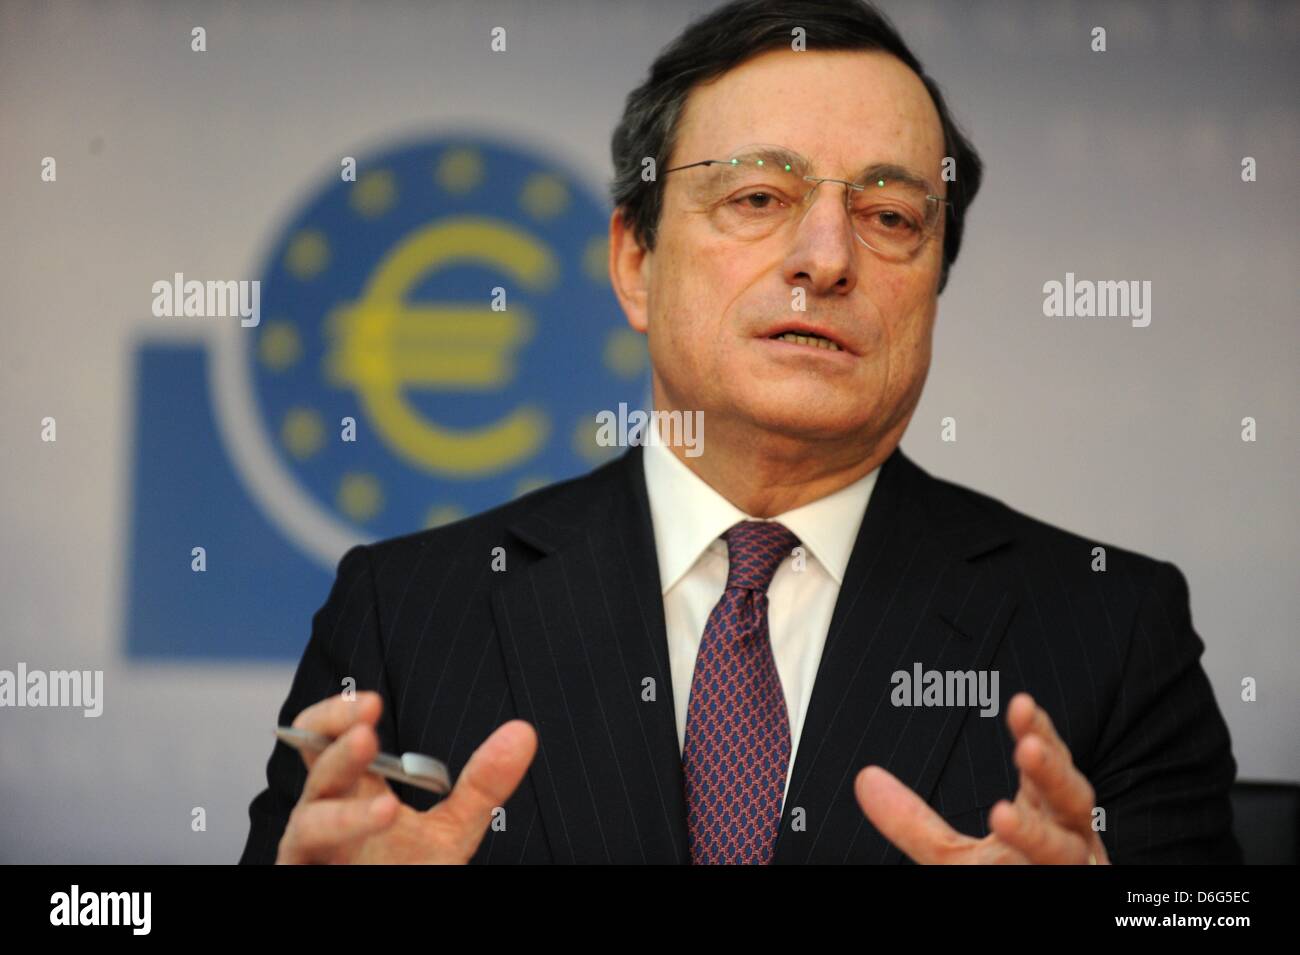 President of the European Central bank (ECB) Mario Draghi holds a press conference at the ECB headquarters in Frankfurt Main, Germany, 09 February 2012. Draghi is not willing to resort to tricks to help out struggeling Greece, but he does not completely rule out exploiting loopholes. Photo: EMILY WABITSCH Stock Photo